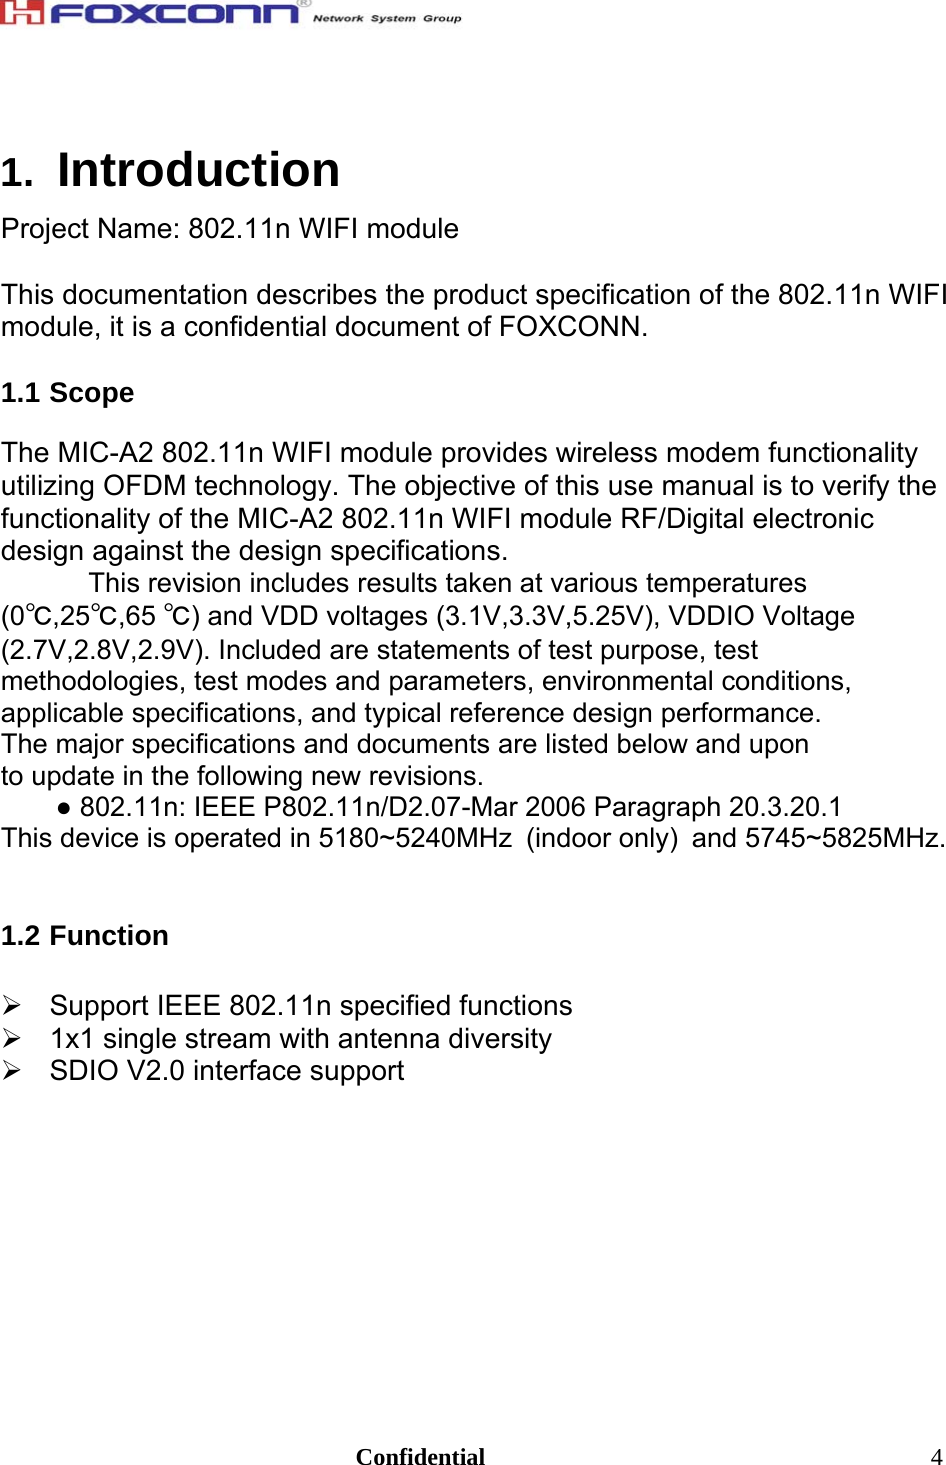                                                                               Confidential  41.  Introduction Project Name: 802.11n WIFI module  This documentation describes the product specification of the 802.11n WIFI module, it is a confidential document of FOXCONN.  1.1 Scope  The MIC-A2 802.11n WIFI module provides wireless modem functionality utilizing OFDM technology. The objective of this use manual is to verify the functionality of the MIC-A2 802.11n WIFI module RF/Digital electronic design against the design specifications.  This revision includes results taken at various temperatures (0℃,25℃,65 ℃) and VDD voltages (3.1V,3.3V,5.25V), VDDIO Voltage (2.7V,2.8V,2.9V). Included are statements of test purpose, test methodologies, test modes and parameters, environmental conditions, applicable specifications, and typical reference design performance. The major specifications and documents are listed below and upon to update in the following new revisions. ● 802.11n: IEEE P802.11n/D2.07-Mar 2006 Paragraph 20.3.20.1 This device is operated in 5180~5240MHz (indoor only) and 5745~5825MHz.   1.2 Function    Support IEEE 802.11n specified functions   1x1 single stream with antenna diversity   SDIO V2.0 interface support  